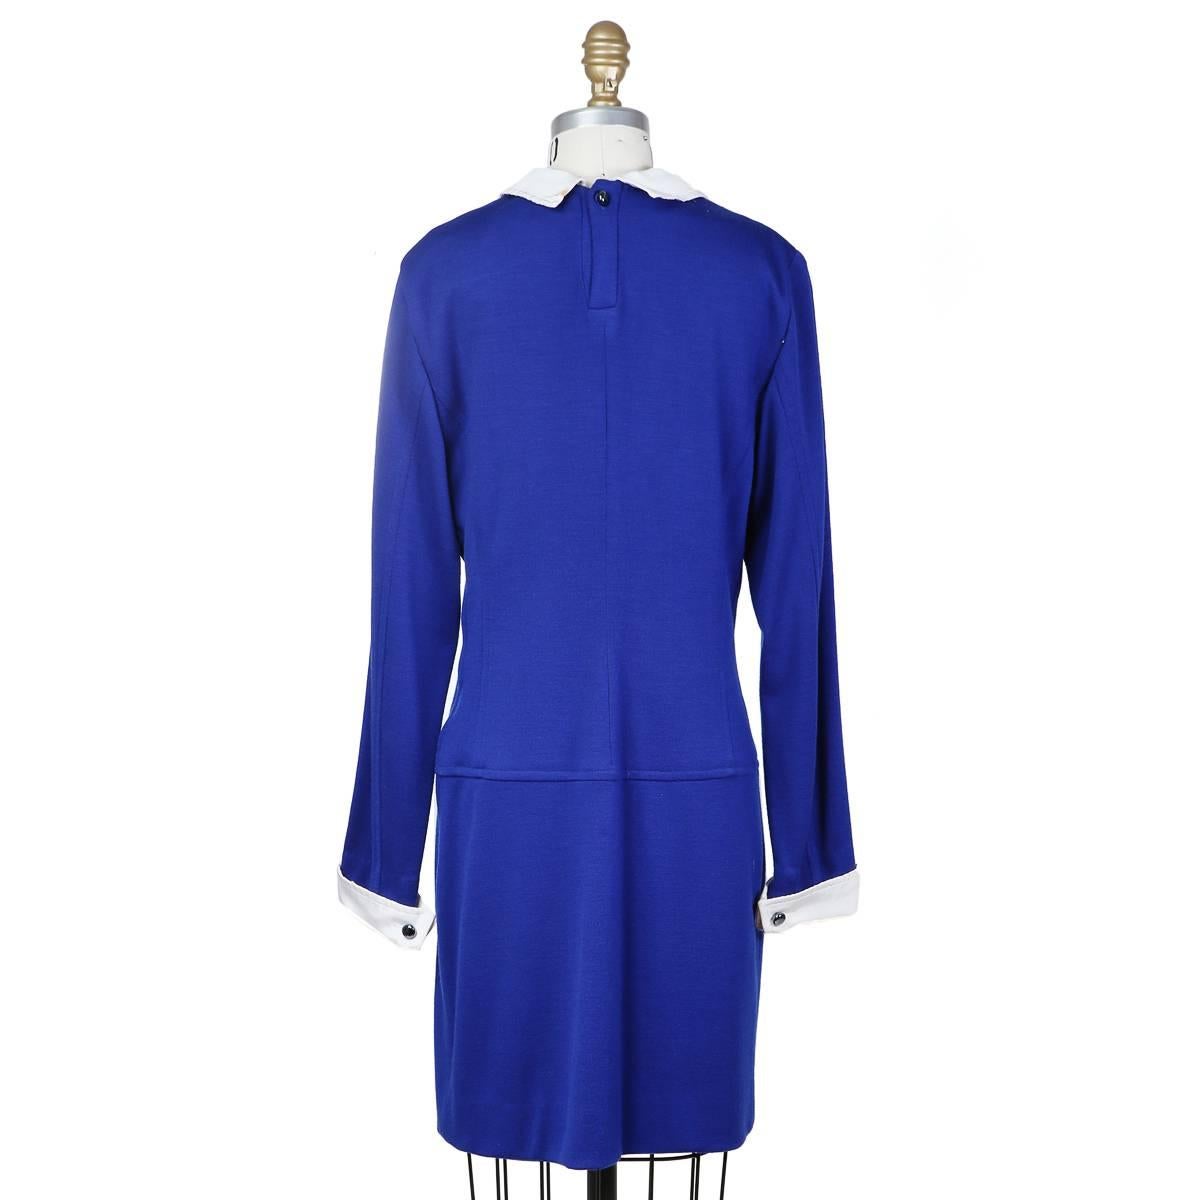 This is a long sleeve dress by Gucci from the 1970s.  It's made from a cobalt blue wool and has detachable white cotton/rayon collar and cuffs.  The closure is a side zipper and a top button and loop closure in back at the neck.  The dress is also